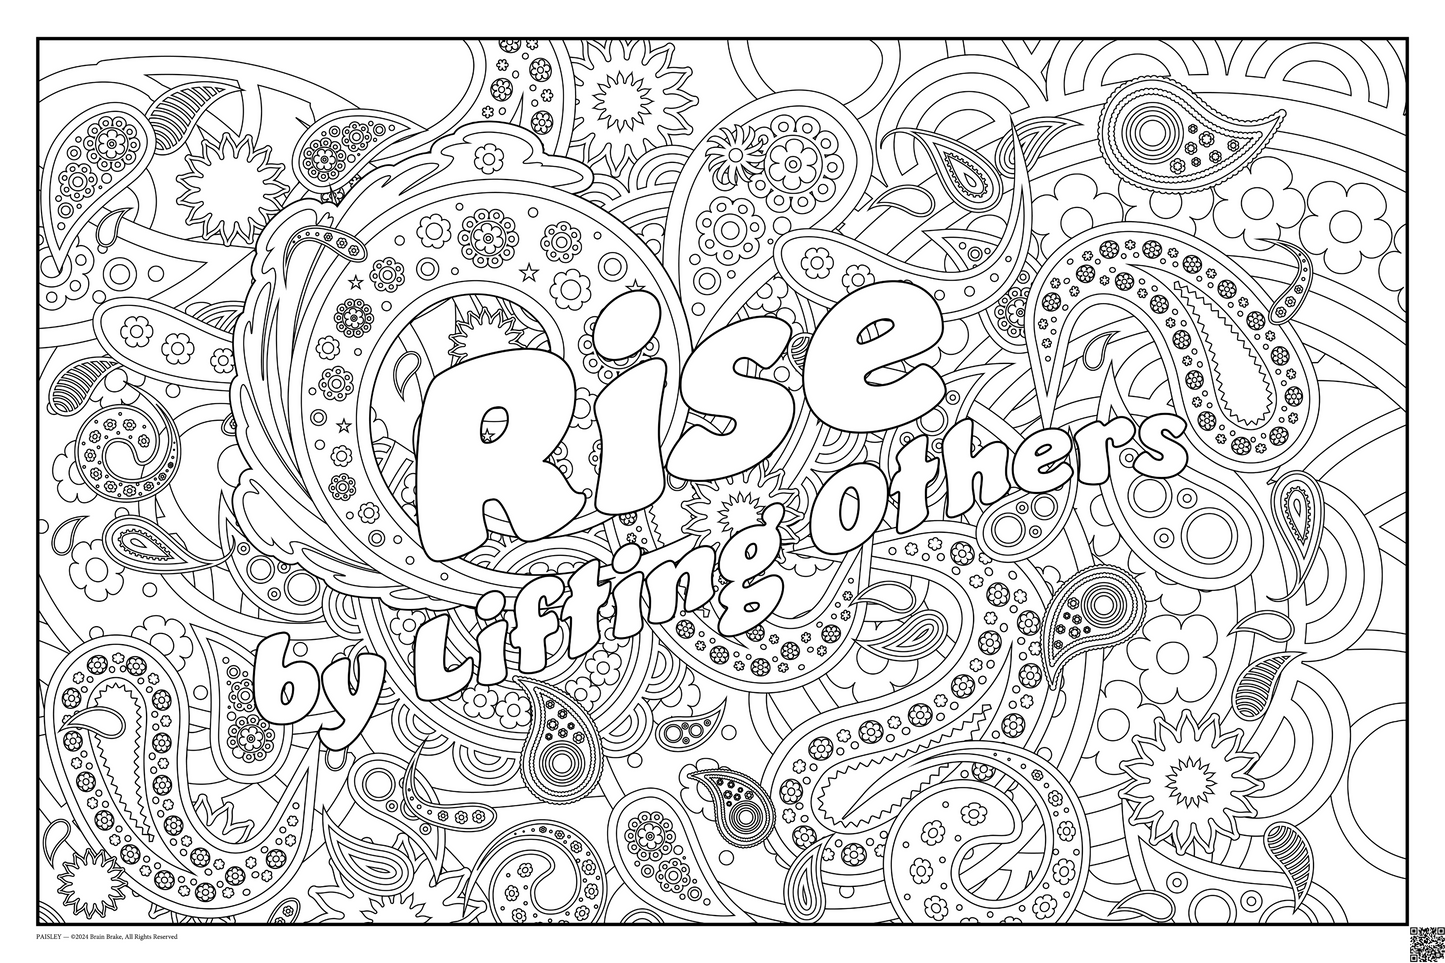 Build Community: Rise by Lifting Others